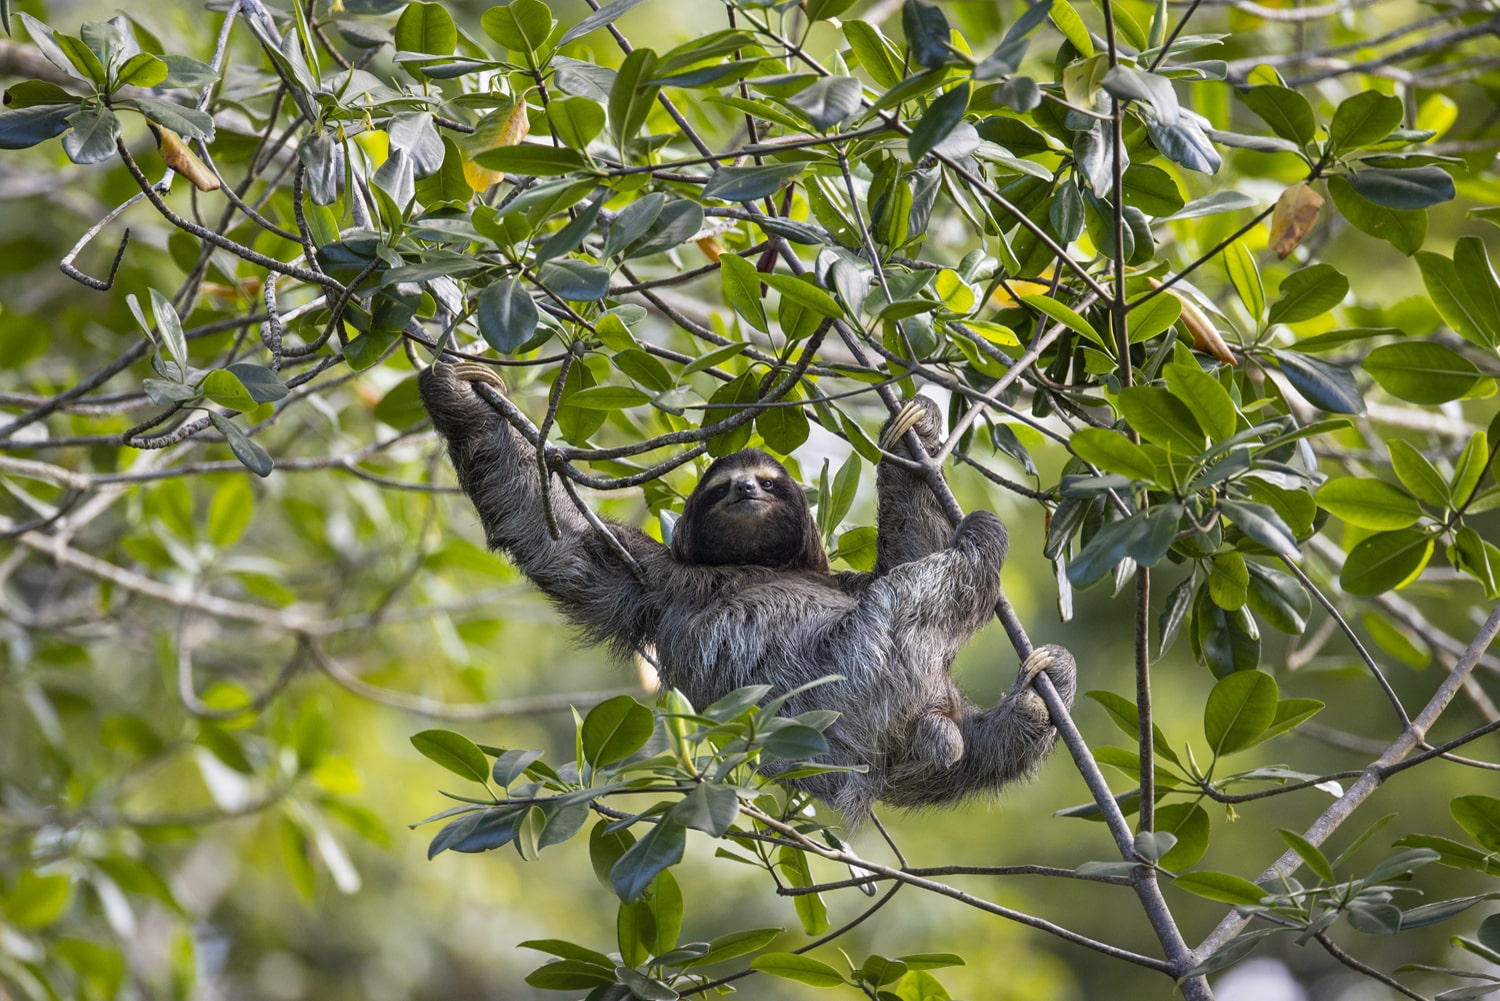 Forests, the sloths' home - The Sloth Conservation Foundation